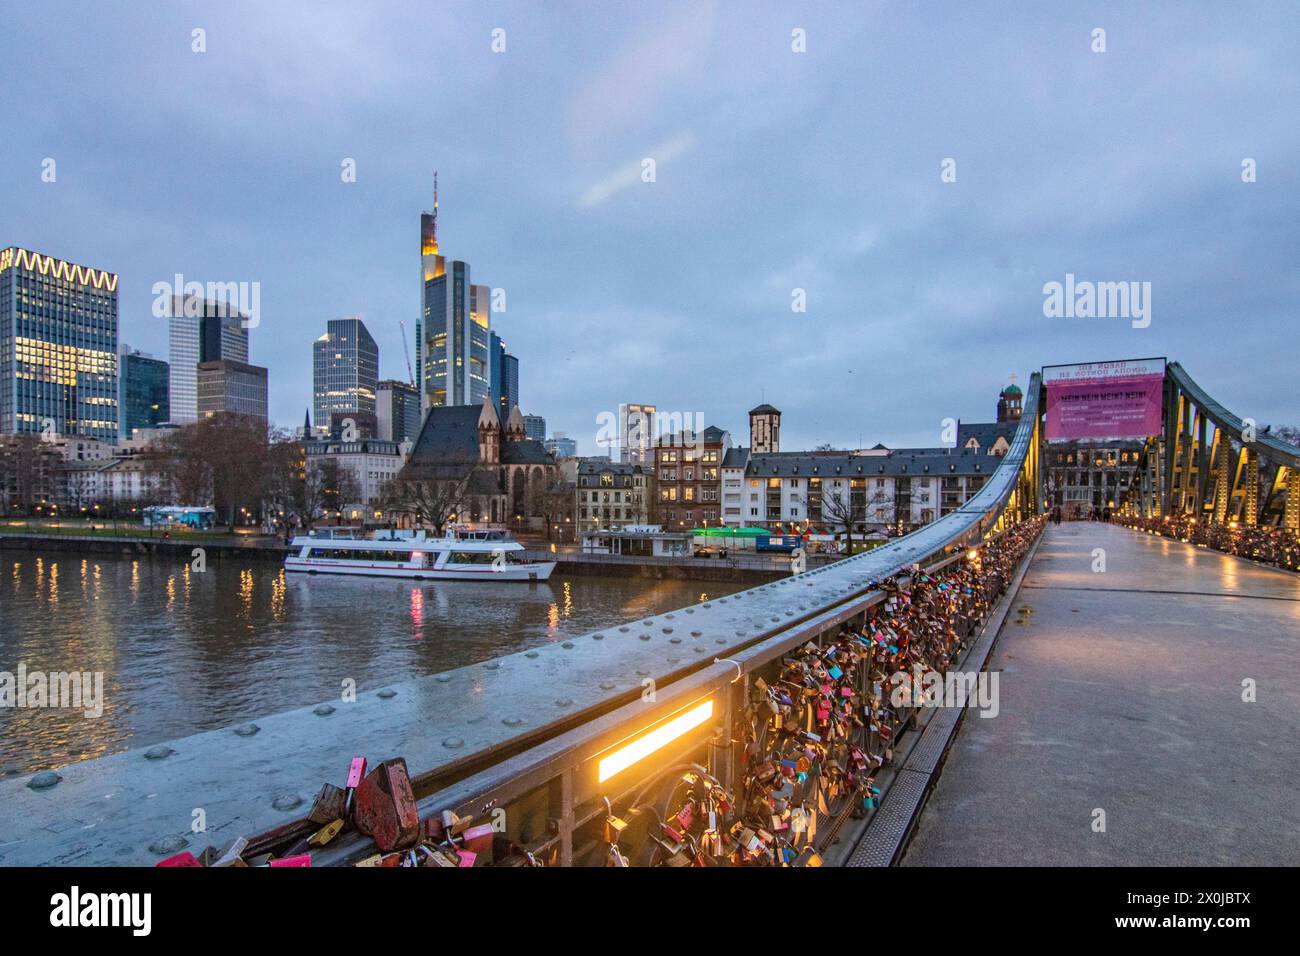 The pedestrian bridge, iron footbridge with love locks on the railing, sunset with a view of the skyline of the financial district of Frankfurt am Main, Germany Stock Photo